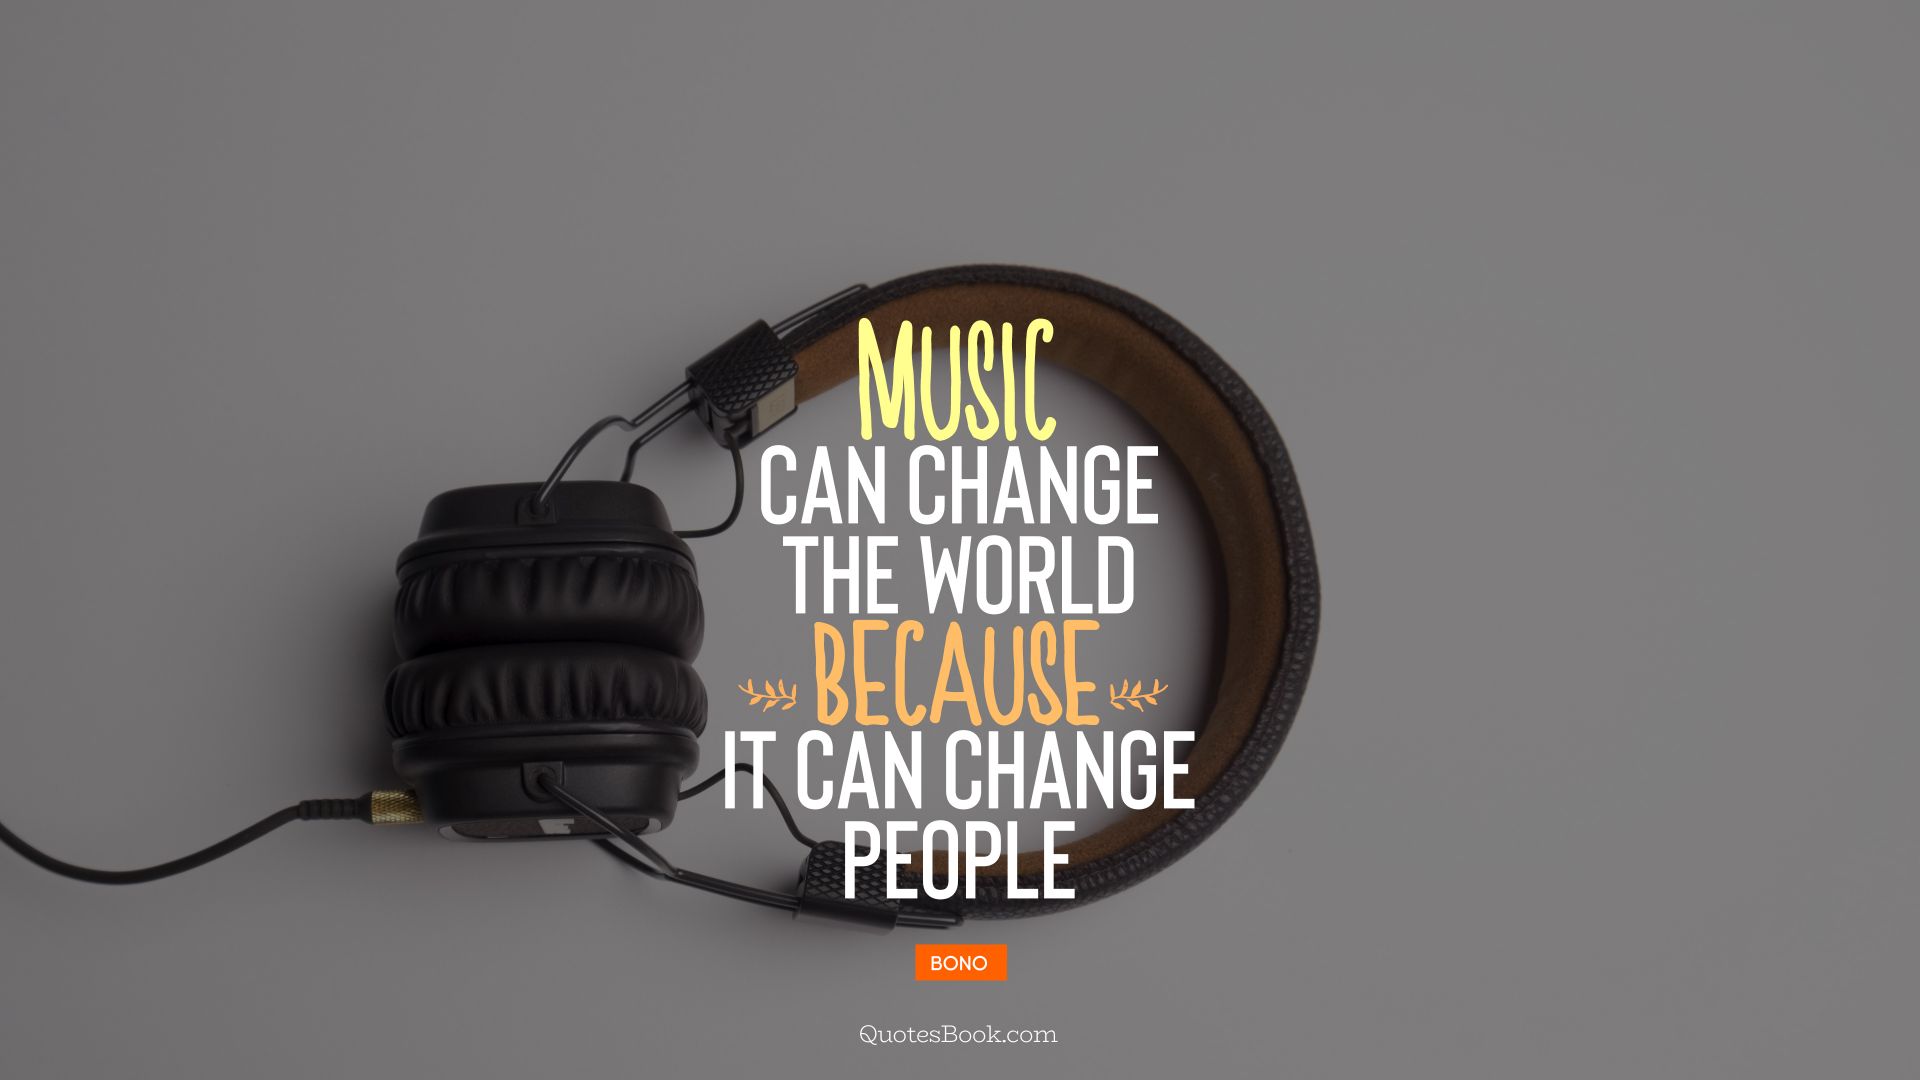 Music can change the world because it can change people. - Quote by Bono